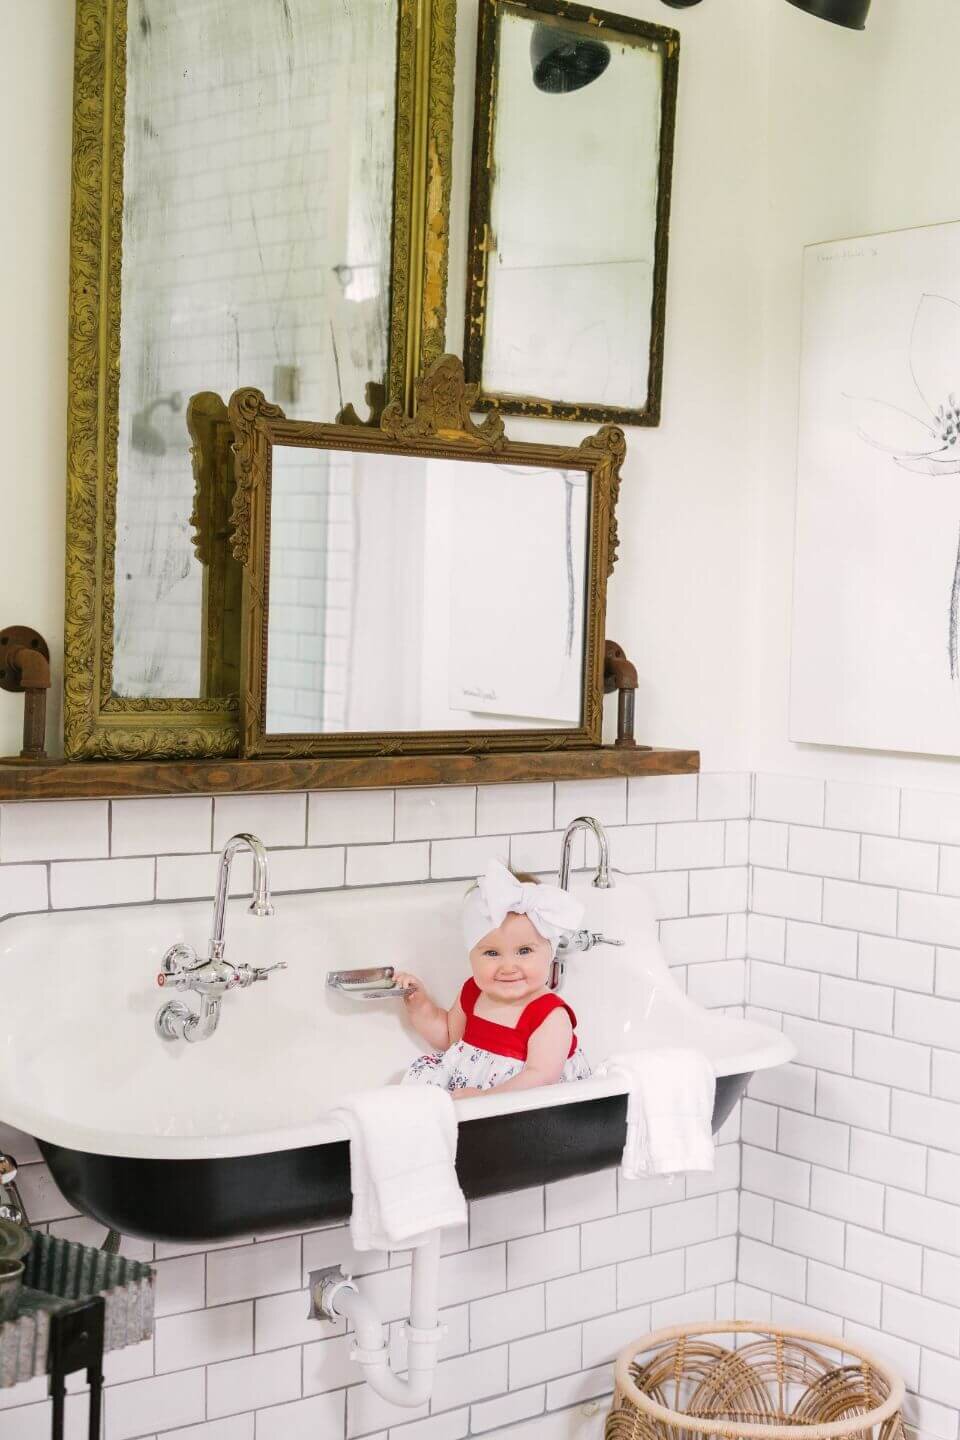 The Morrow House Home Tour - Historic Waco AirBnb - Cottage Home external - As Seen in Fixer Upper Season 5 - Vintage Mirrors Layered in Bathroom - Vintage Sink - Baby in Sink -万博赞助意大利甲级联赛农舍生活。jpg